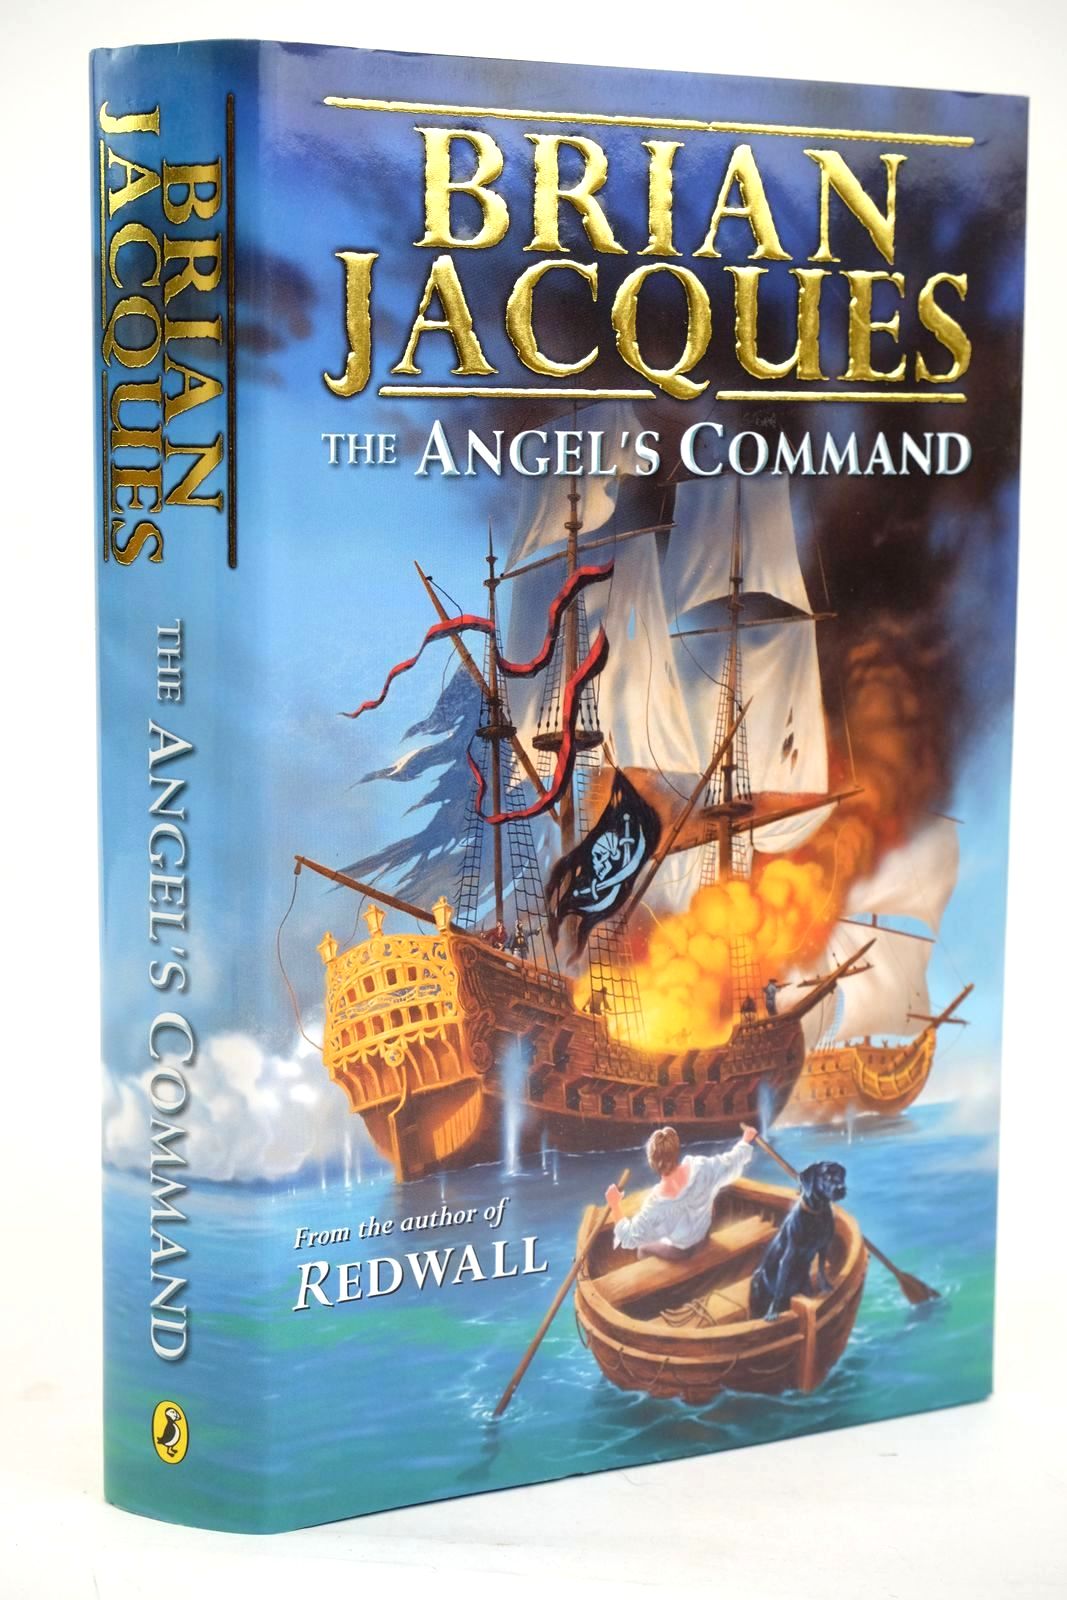 Photo of THE ANGEL'S COMMAND written by Jacques, Brian illustrated by Elliot, David published by Puffin Books (STOCK CODE: 1319398)  for sale by Stella & Rose's Books